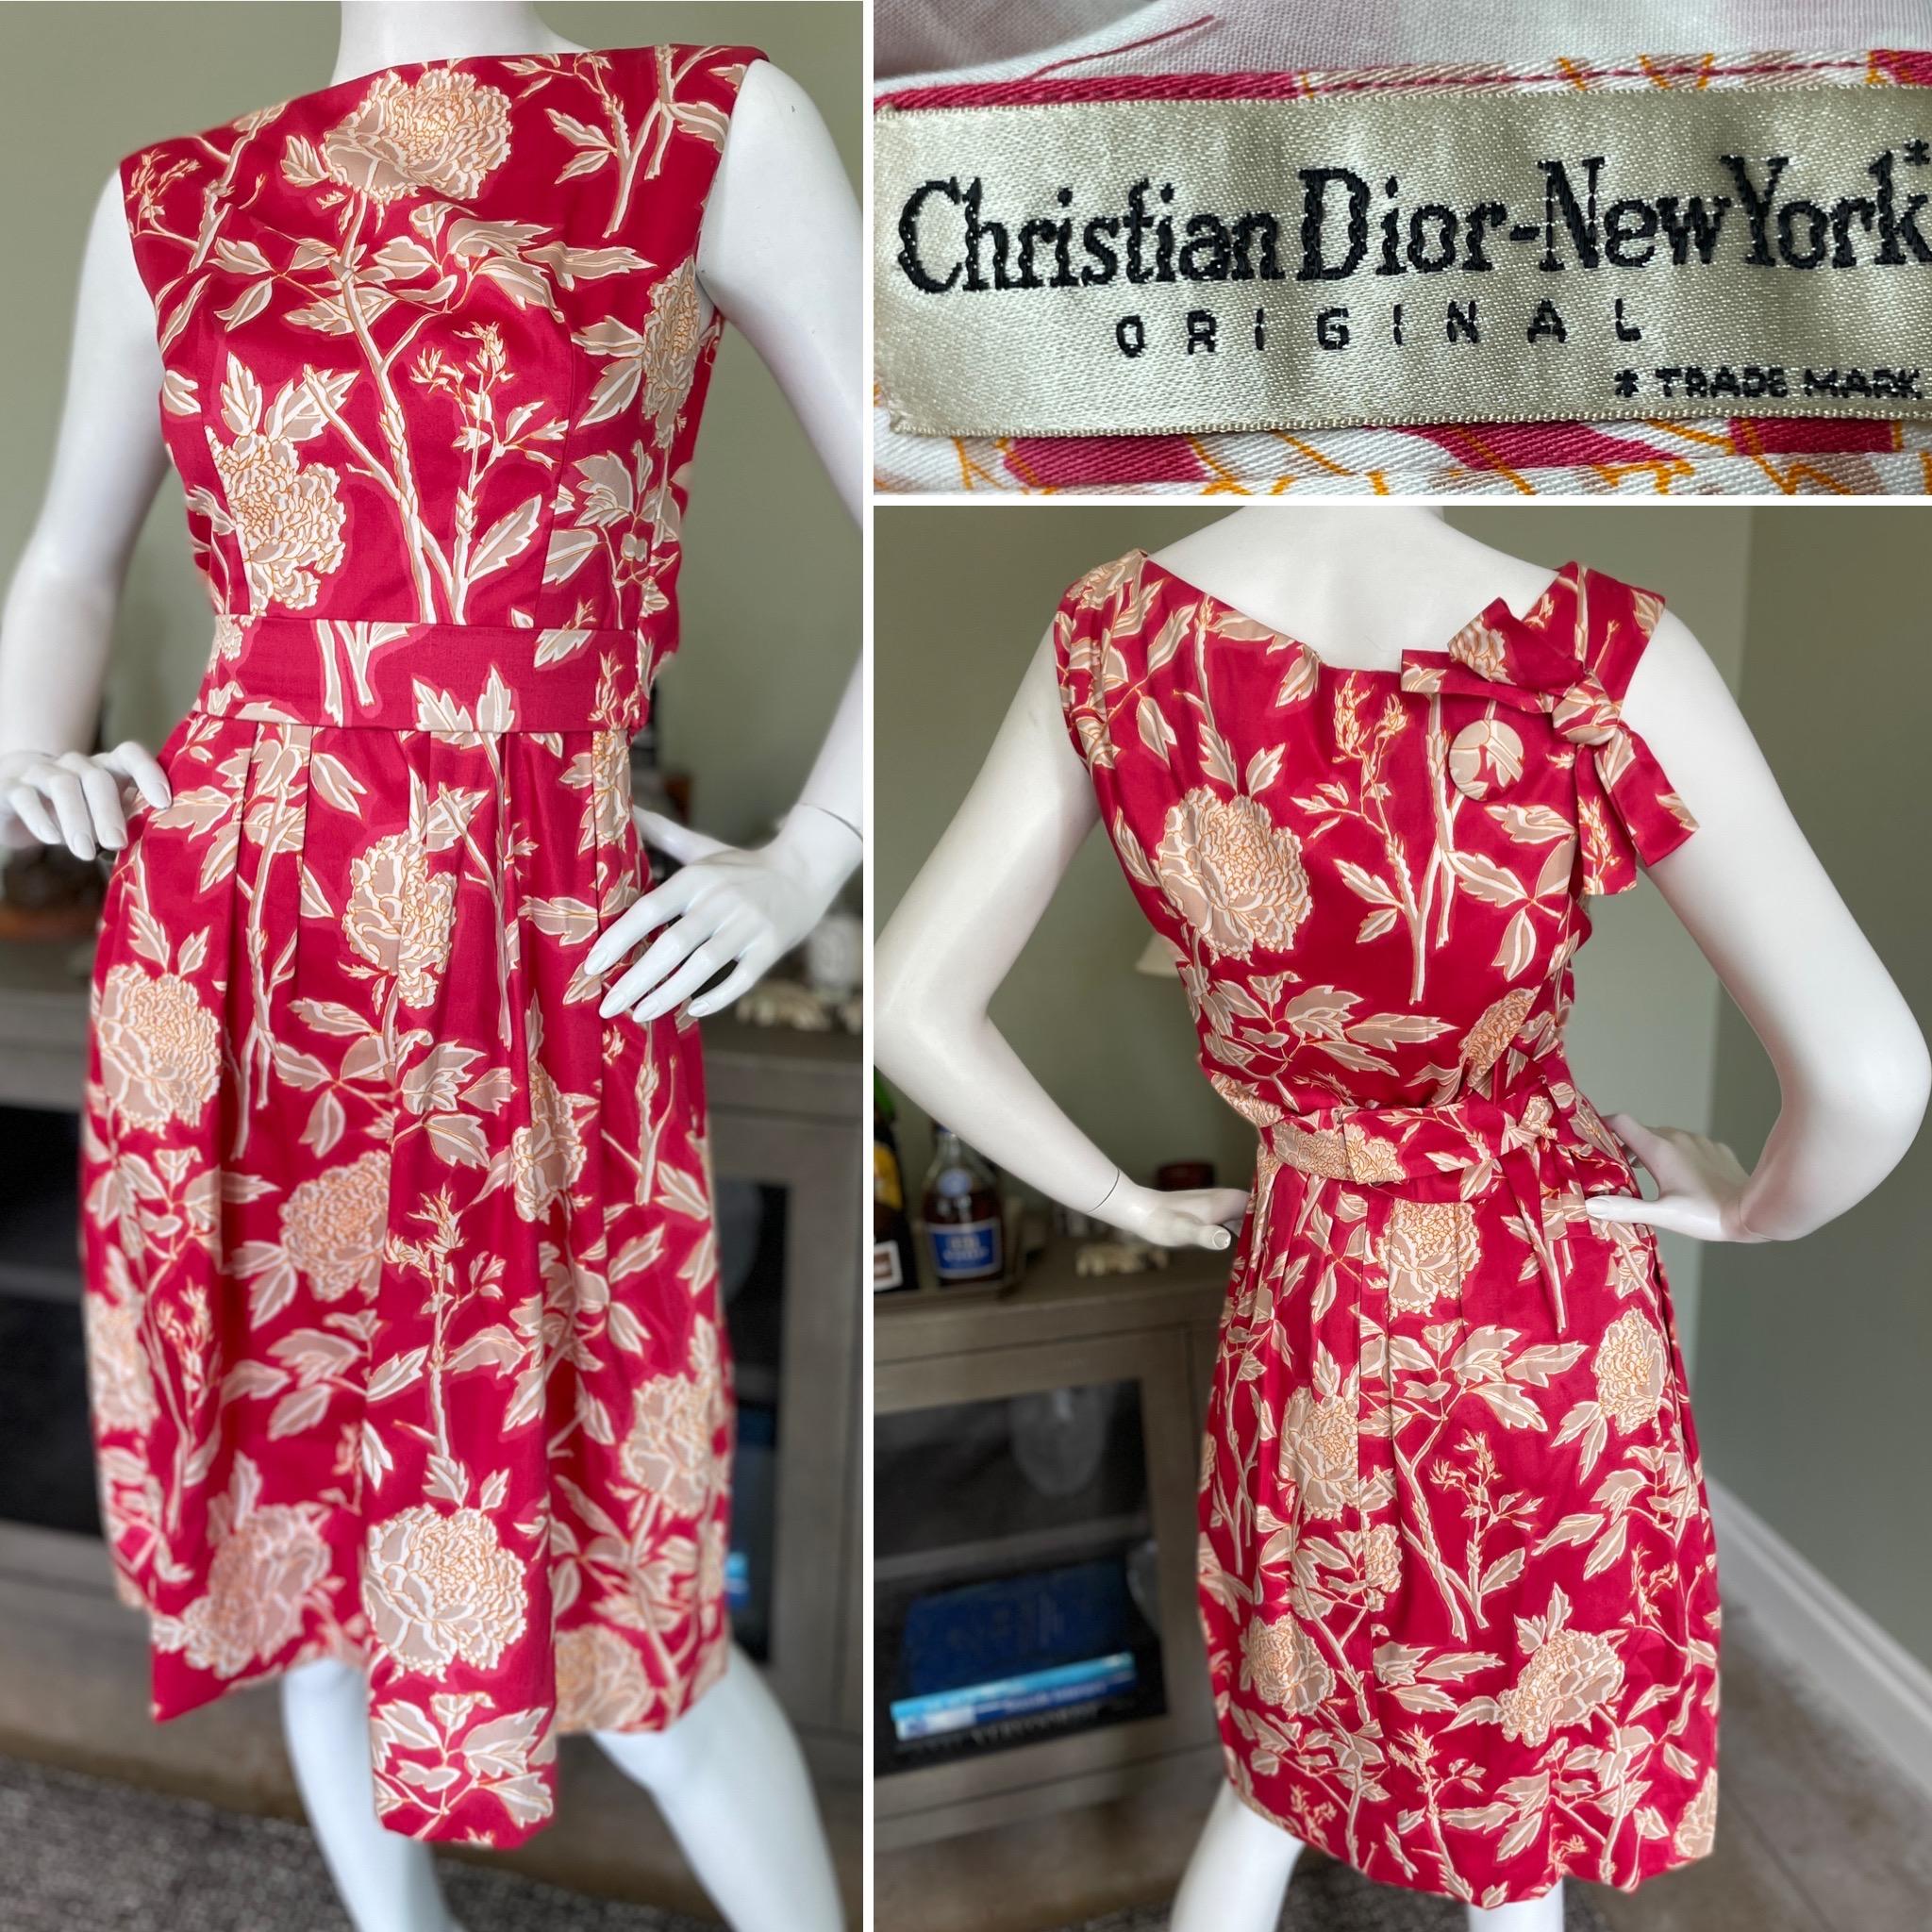 Christian Dior New York 1960's Floral Day Dress
 This is so much prettier than the photos show.
Marked size 10, more like 4-6 today
 Bust 36